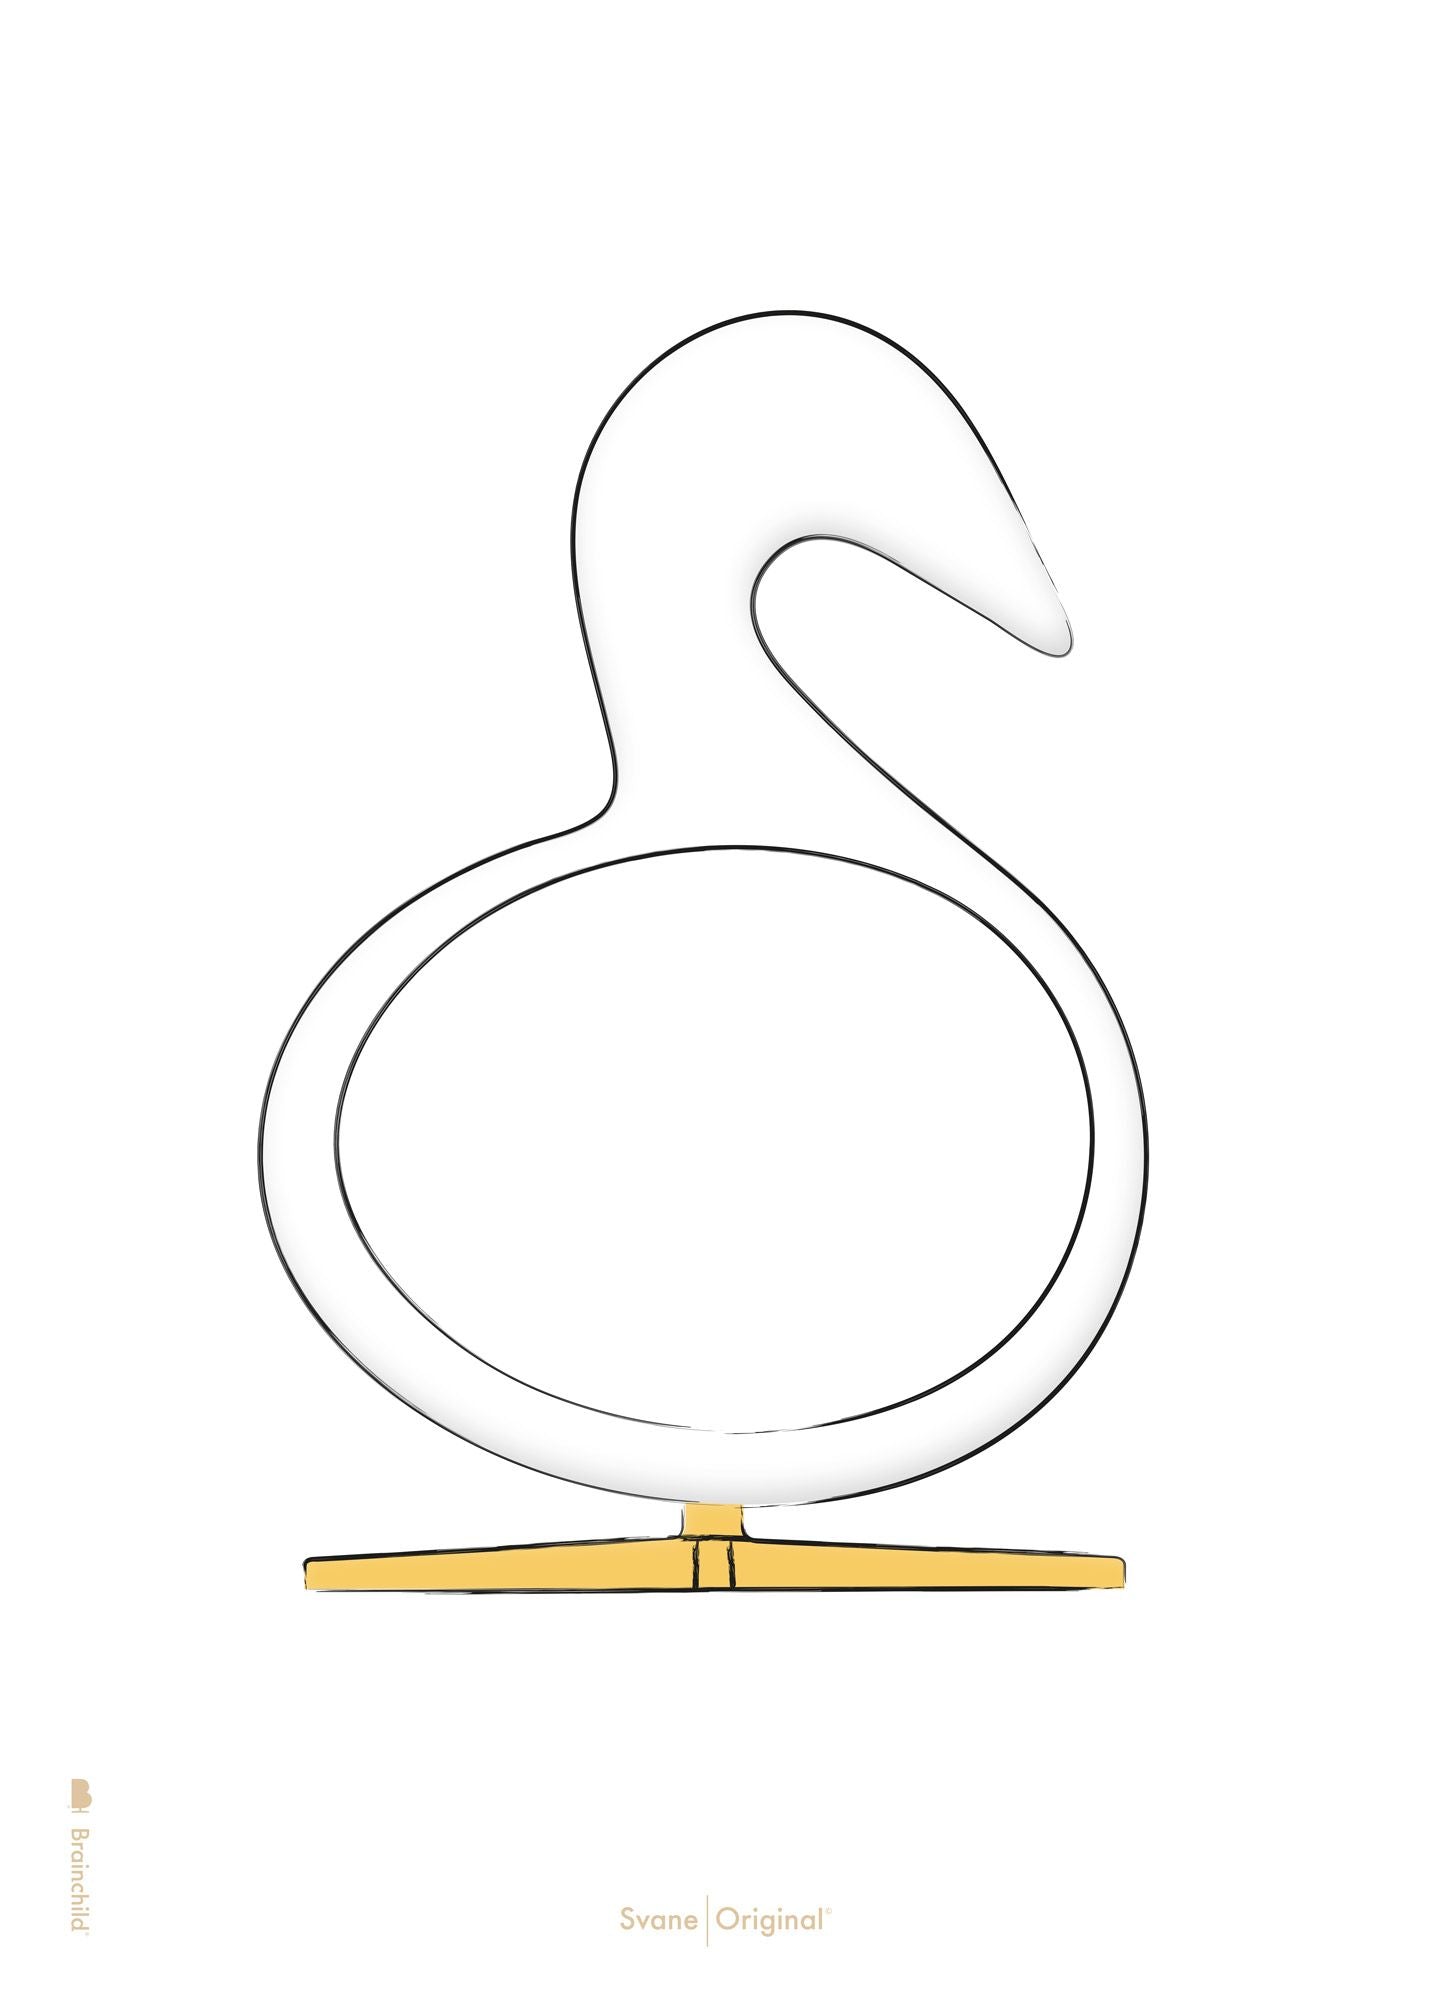 Brainchild Swan Design Sketch Poster Without Frame A5, White Background